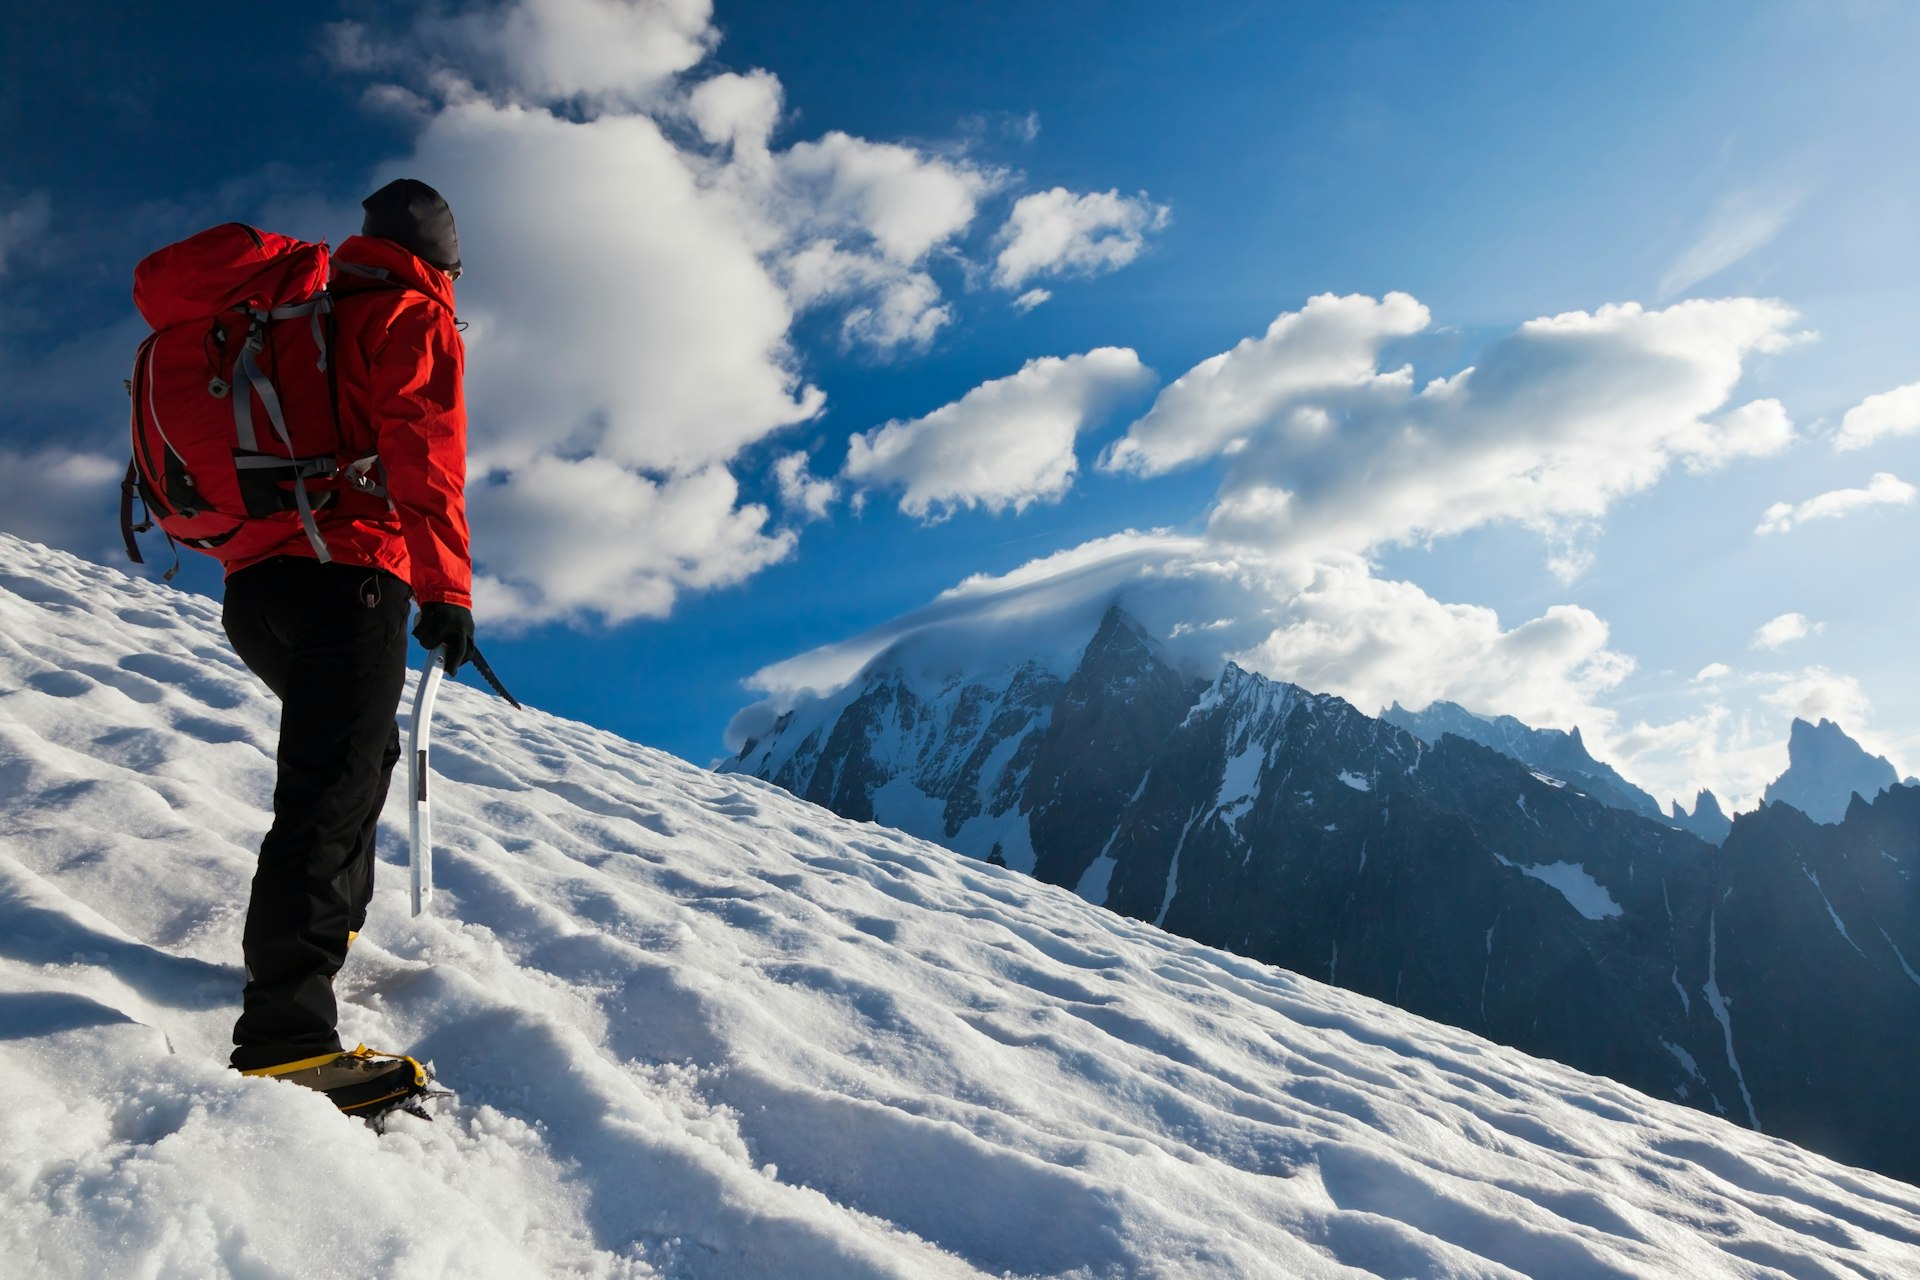 A man stands on a snowy mountain overlooking another snow-capped mountain 